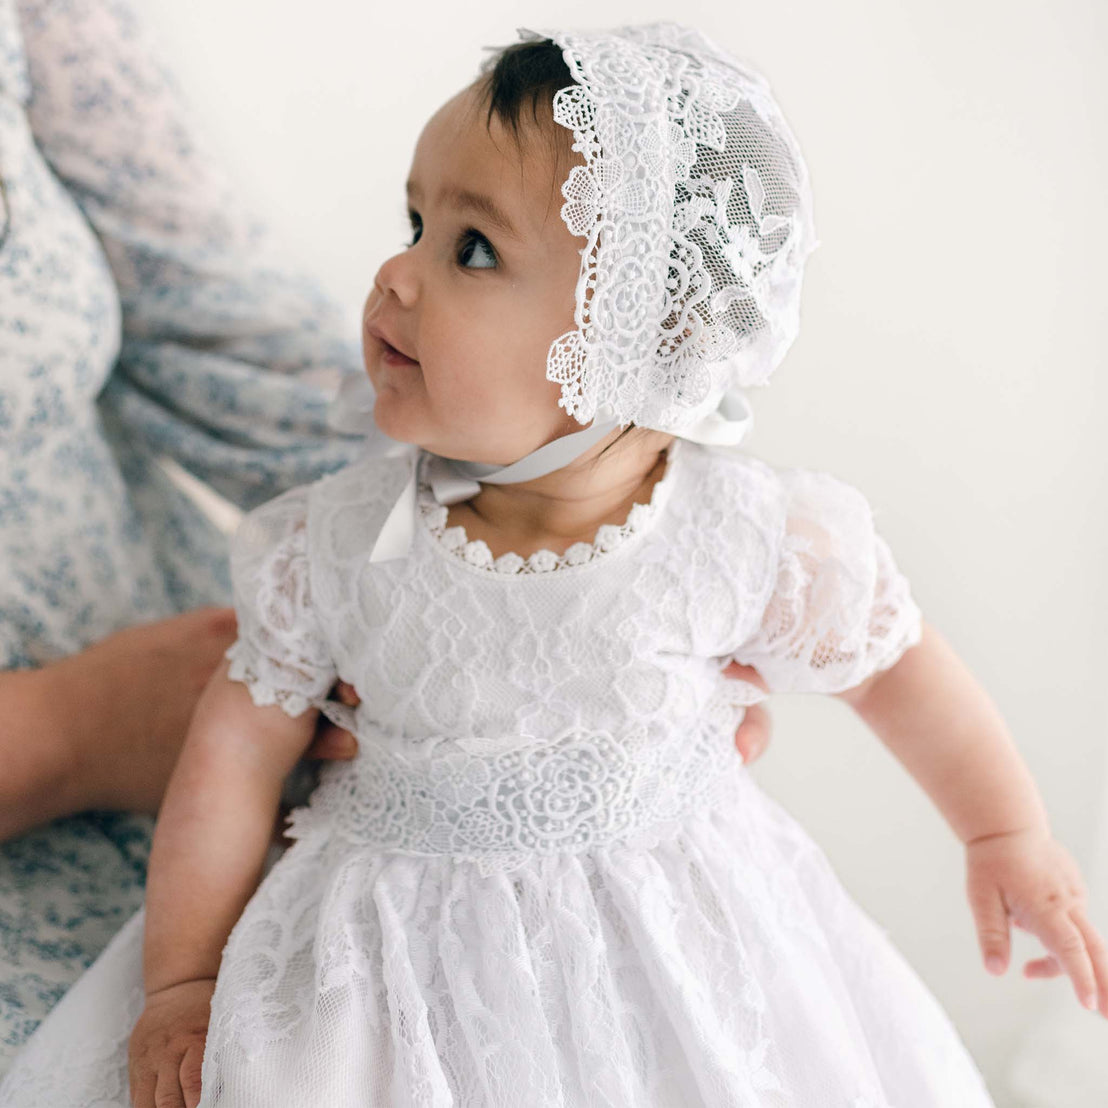 A baby in an Olivia Christening Gown & Bonnet looks up during a baptism, held by an adult against a light-colored background.